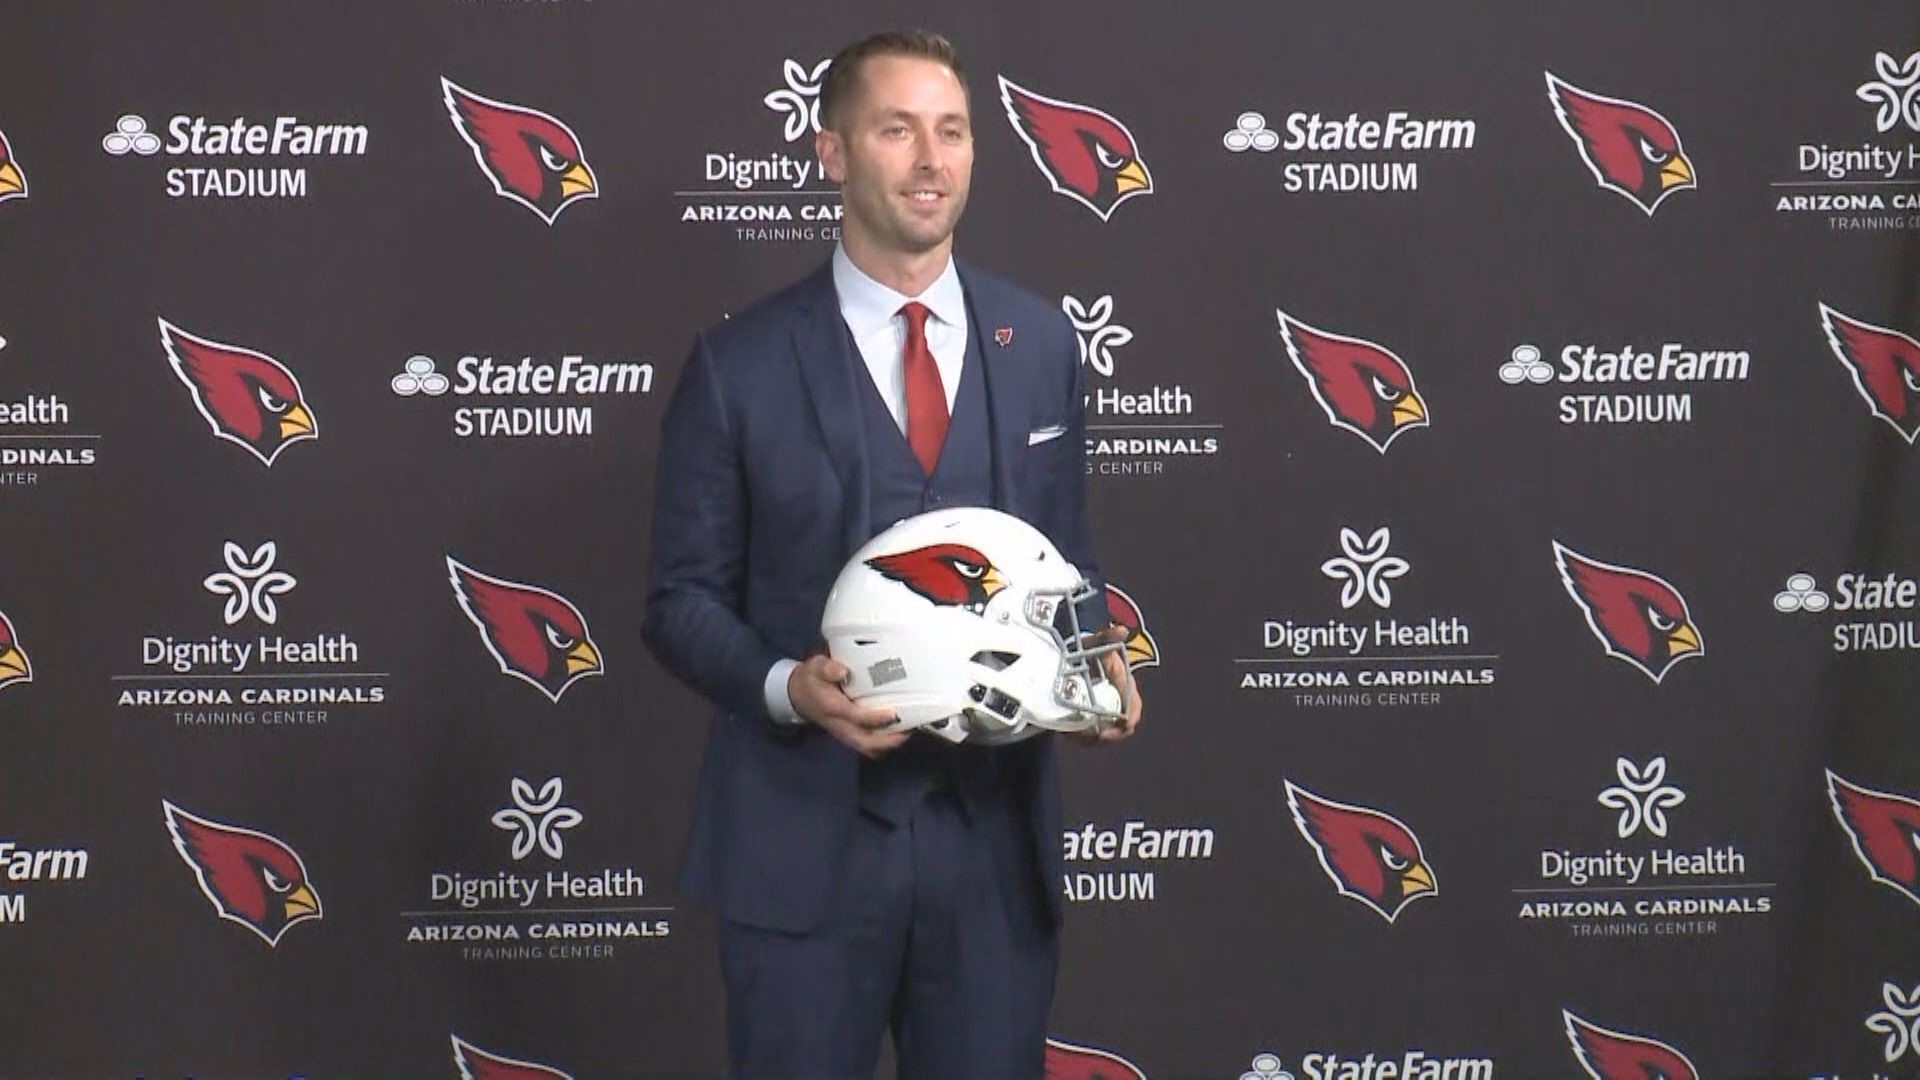 Arizona Cardinals Head Coach Kliff Kingsbury has tested positive for COVID-19. Quarterbacks coach Cam Turner and defensive tackle Zach Allen have tested positive too